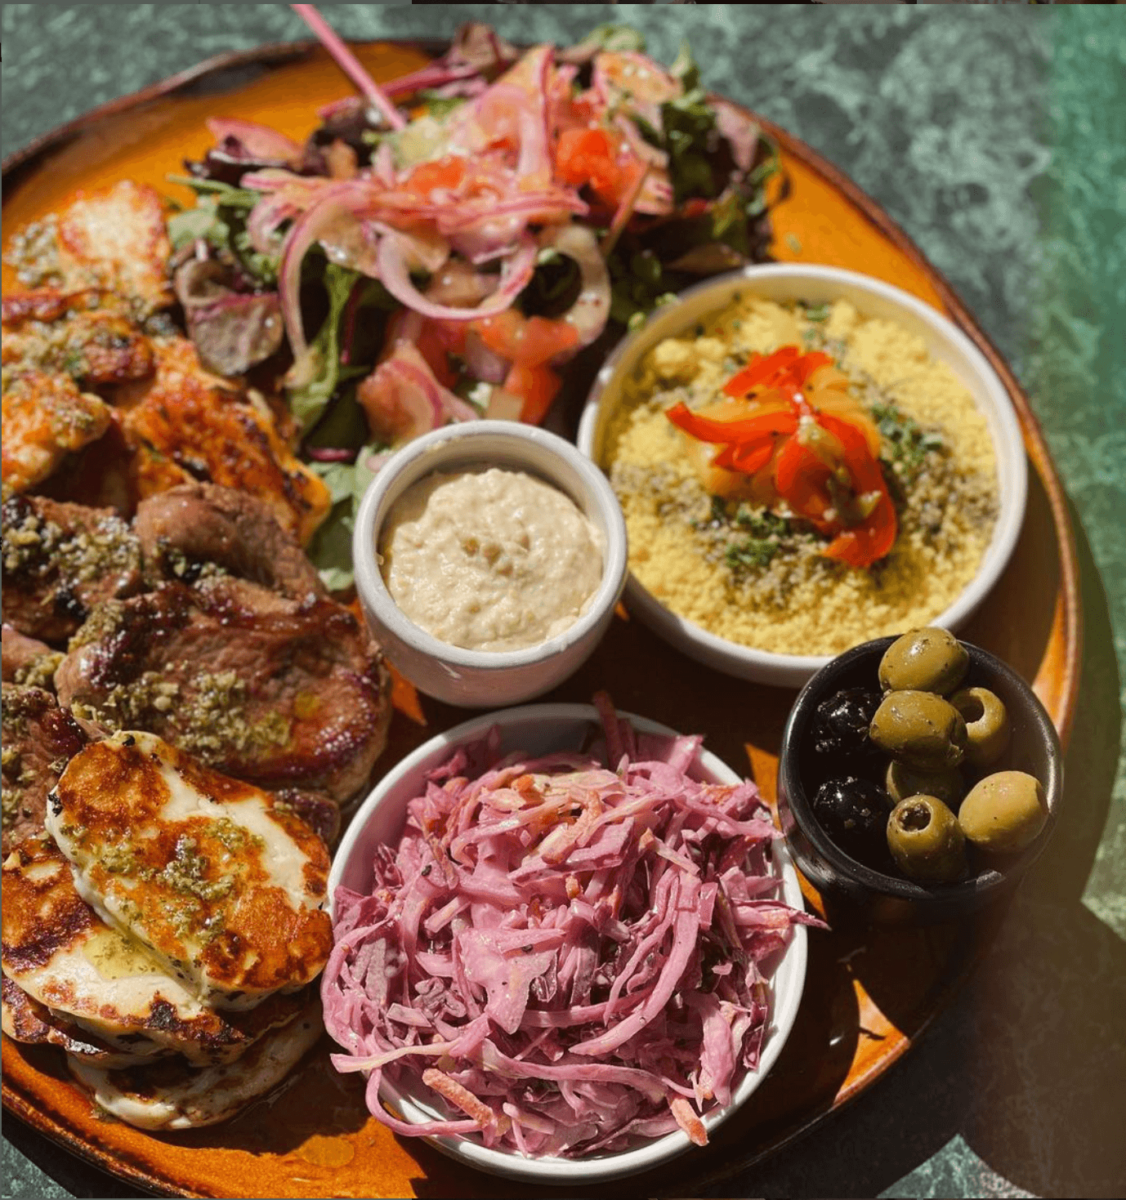 A meze plate with olives, salad, coleslaw, couscous, hummus and grilled halloumi